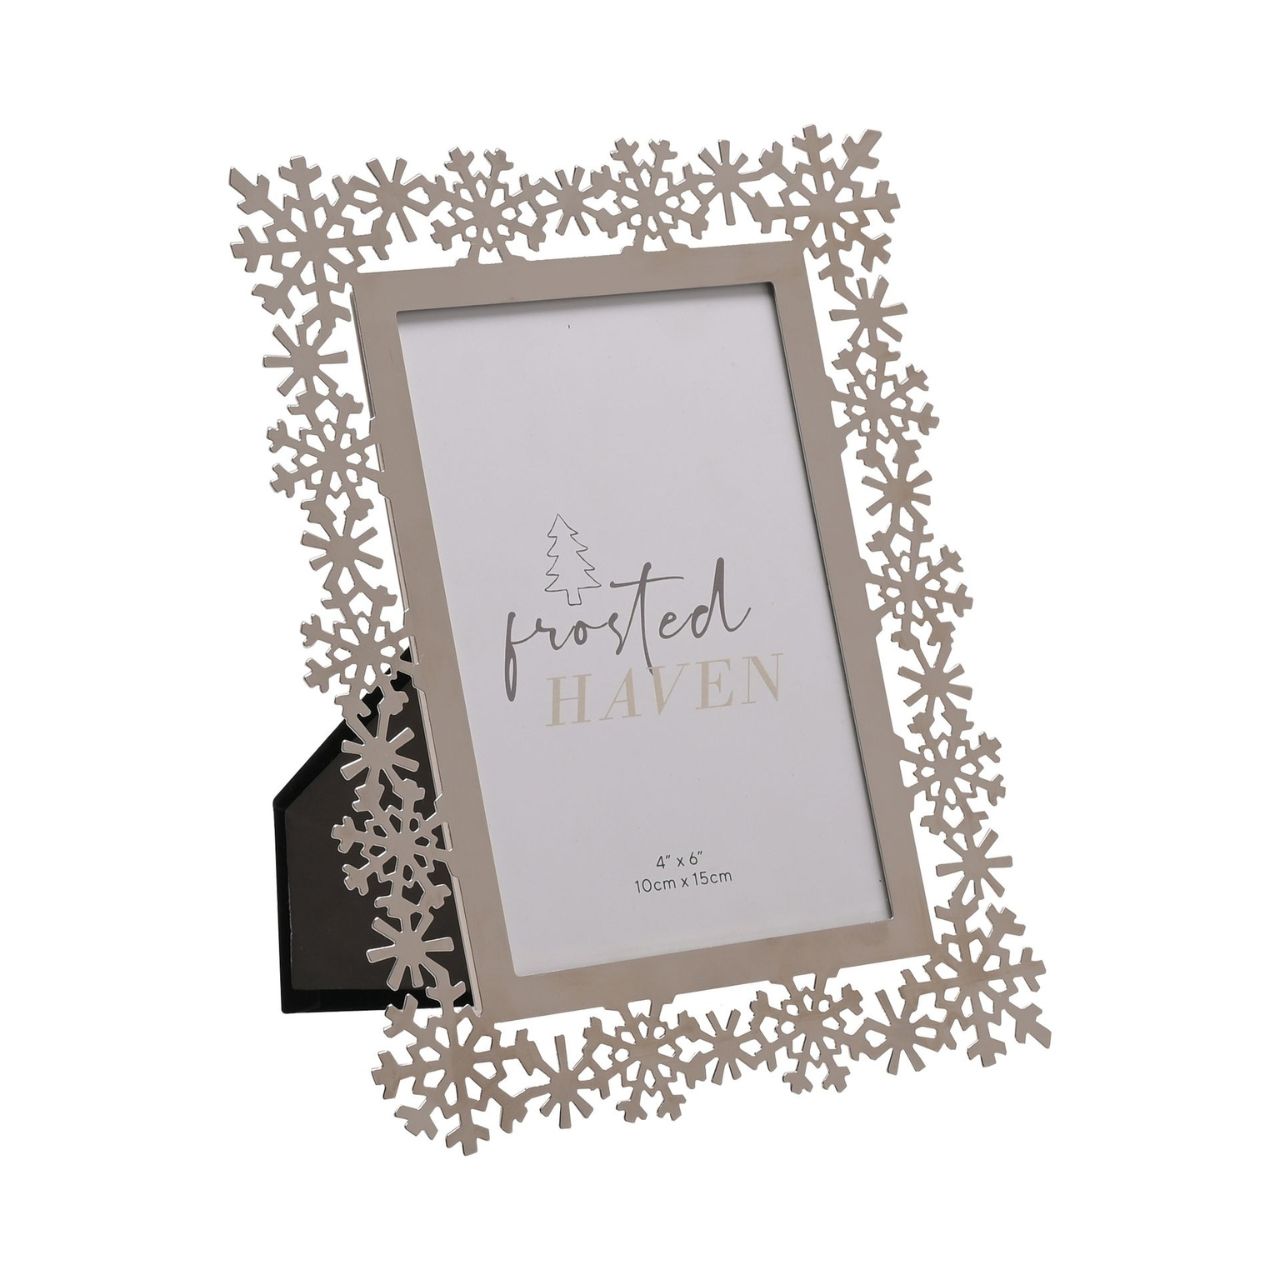 Silverplated Christmas Snowflake Photo Frame 4" x 6"  A silver plated snowflake photo frame.  This glistening frame provides a festive display for photographs of loved ones at Christmas time.